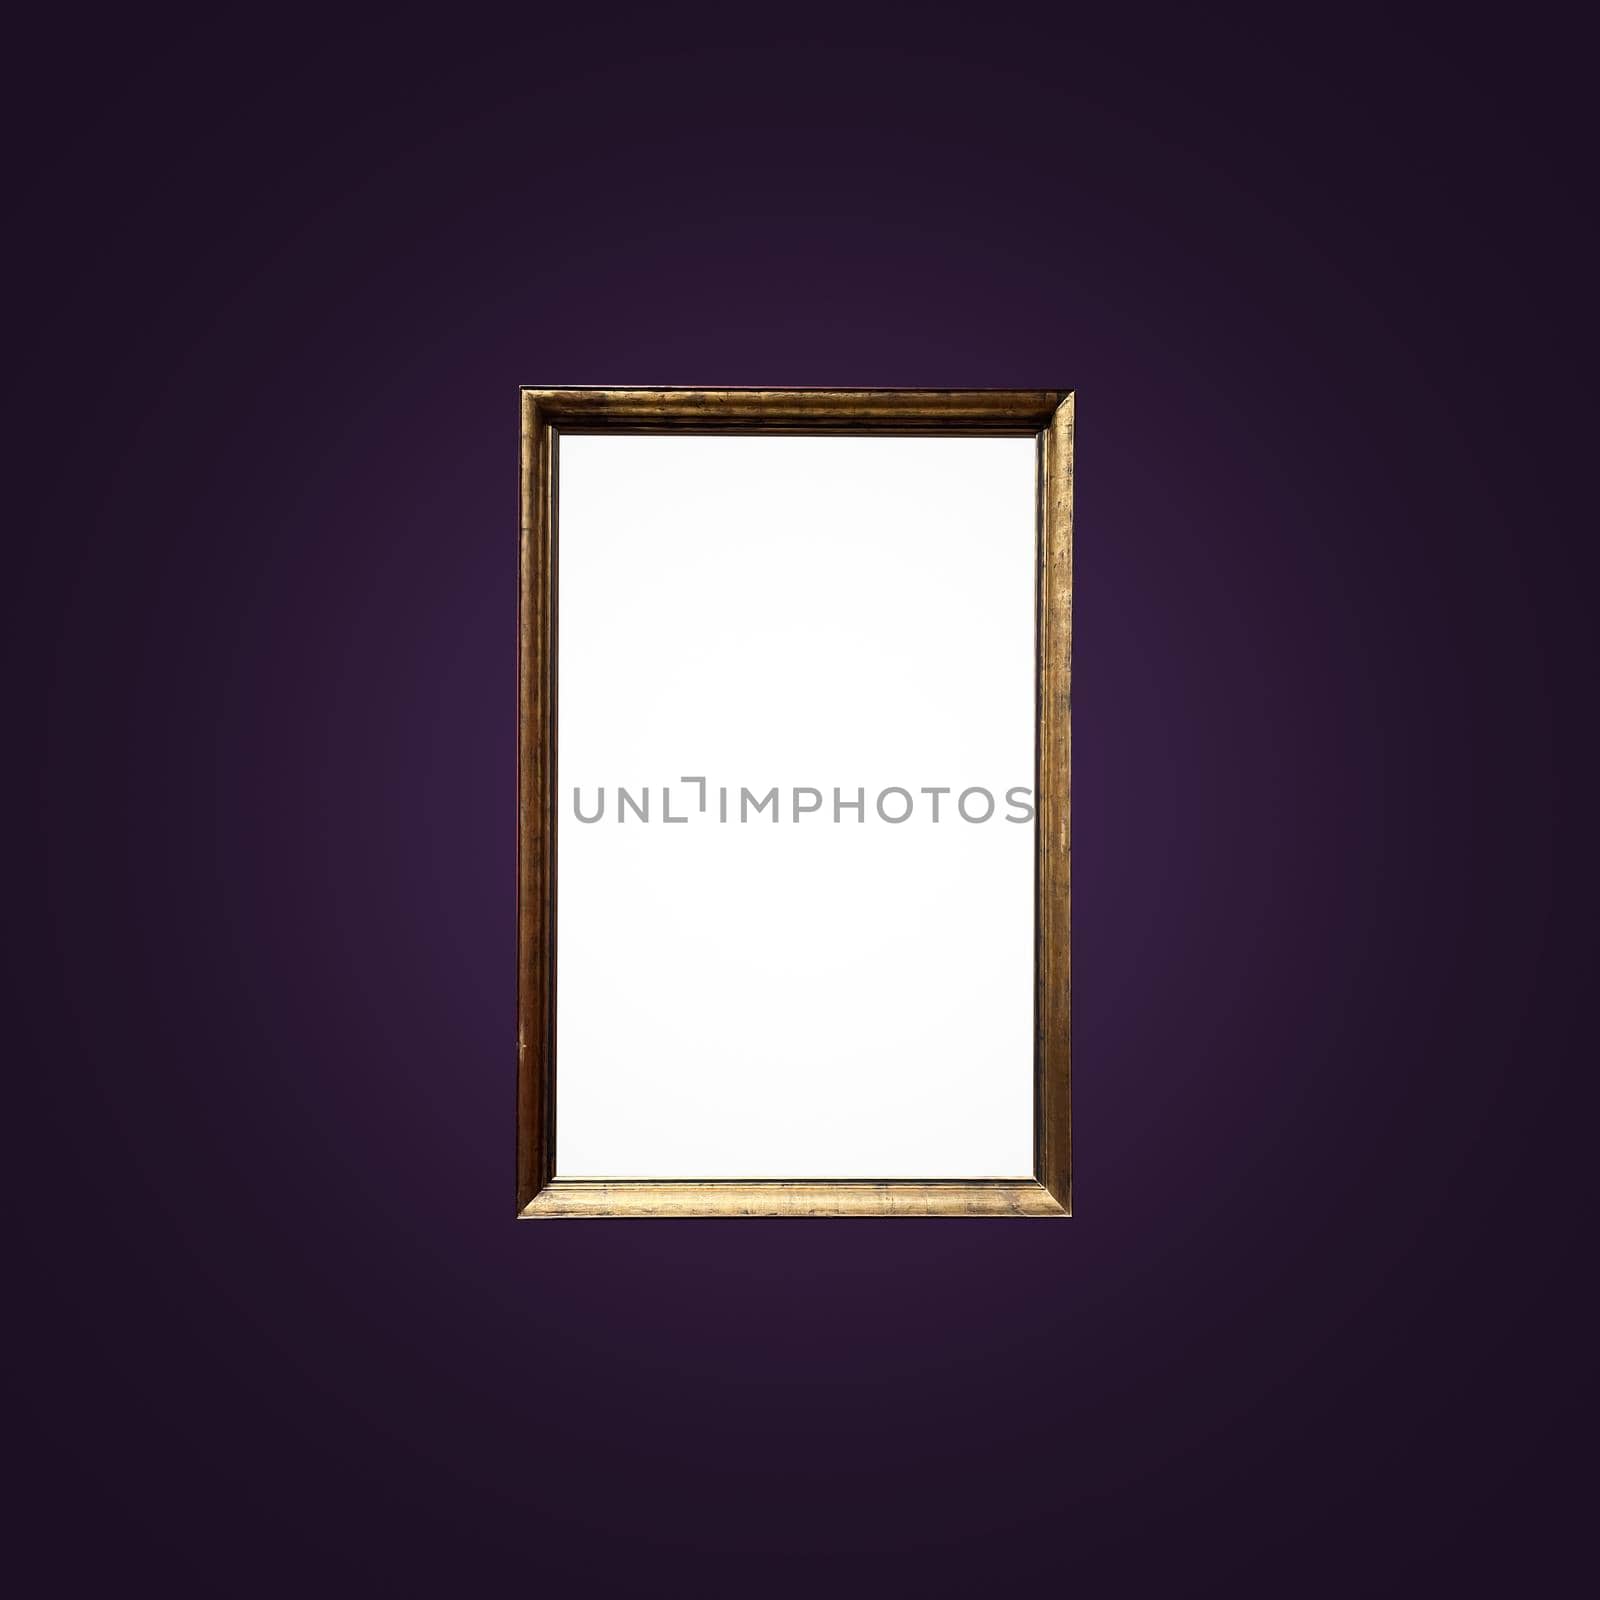 Antique art fair gallery frame on royal purple wall at auction house or museum exhibition, blank template with empty white copyspace for mockup design, artwork by Anneleven